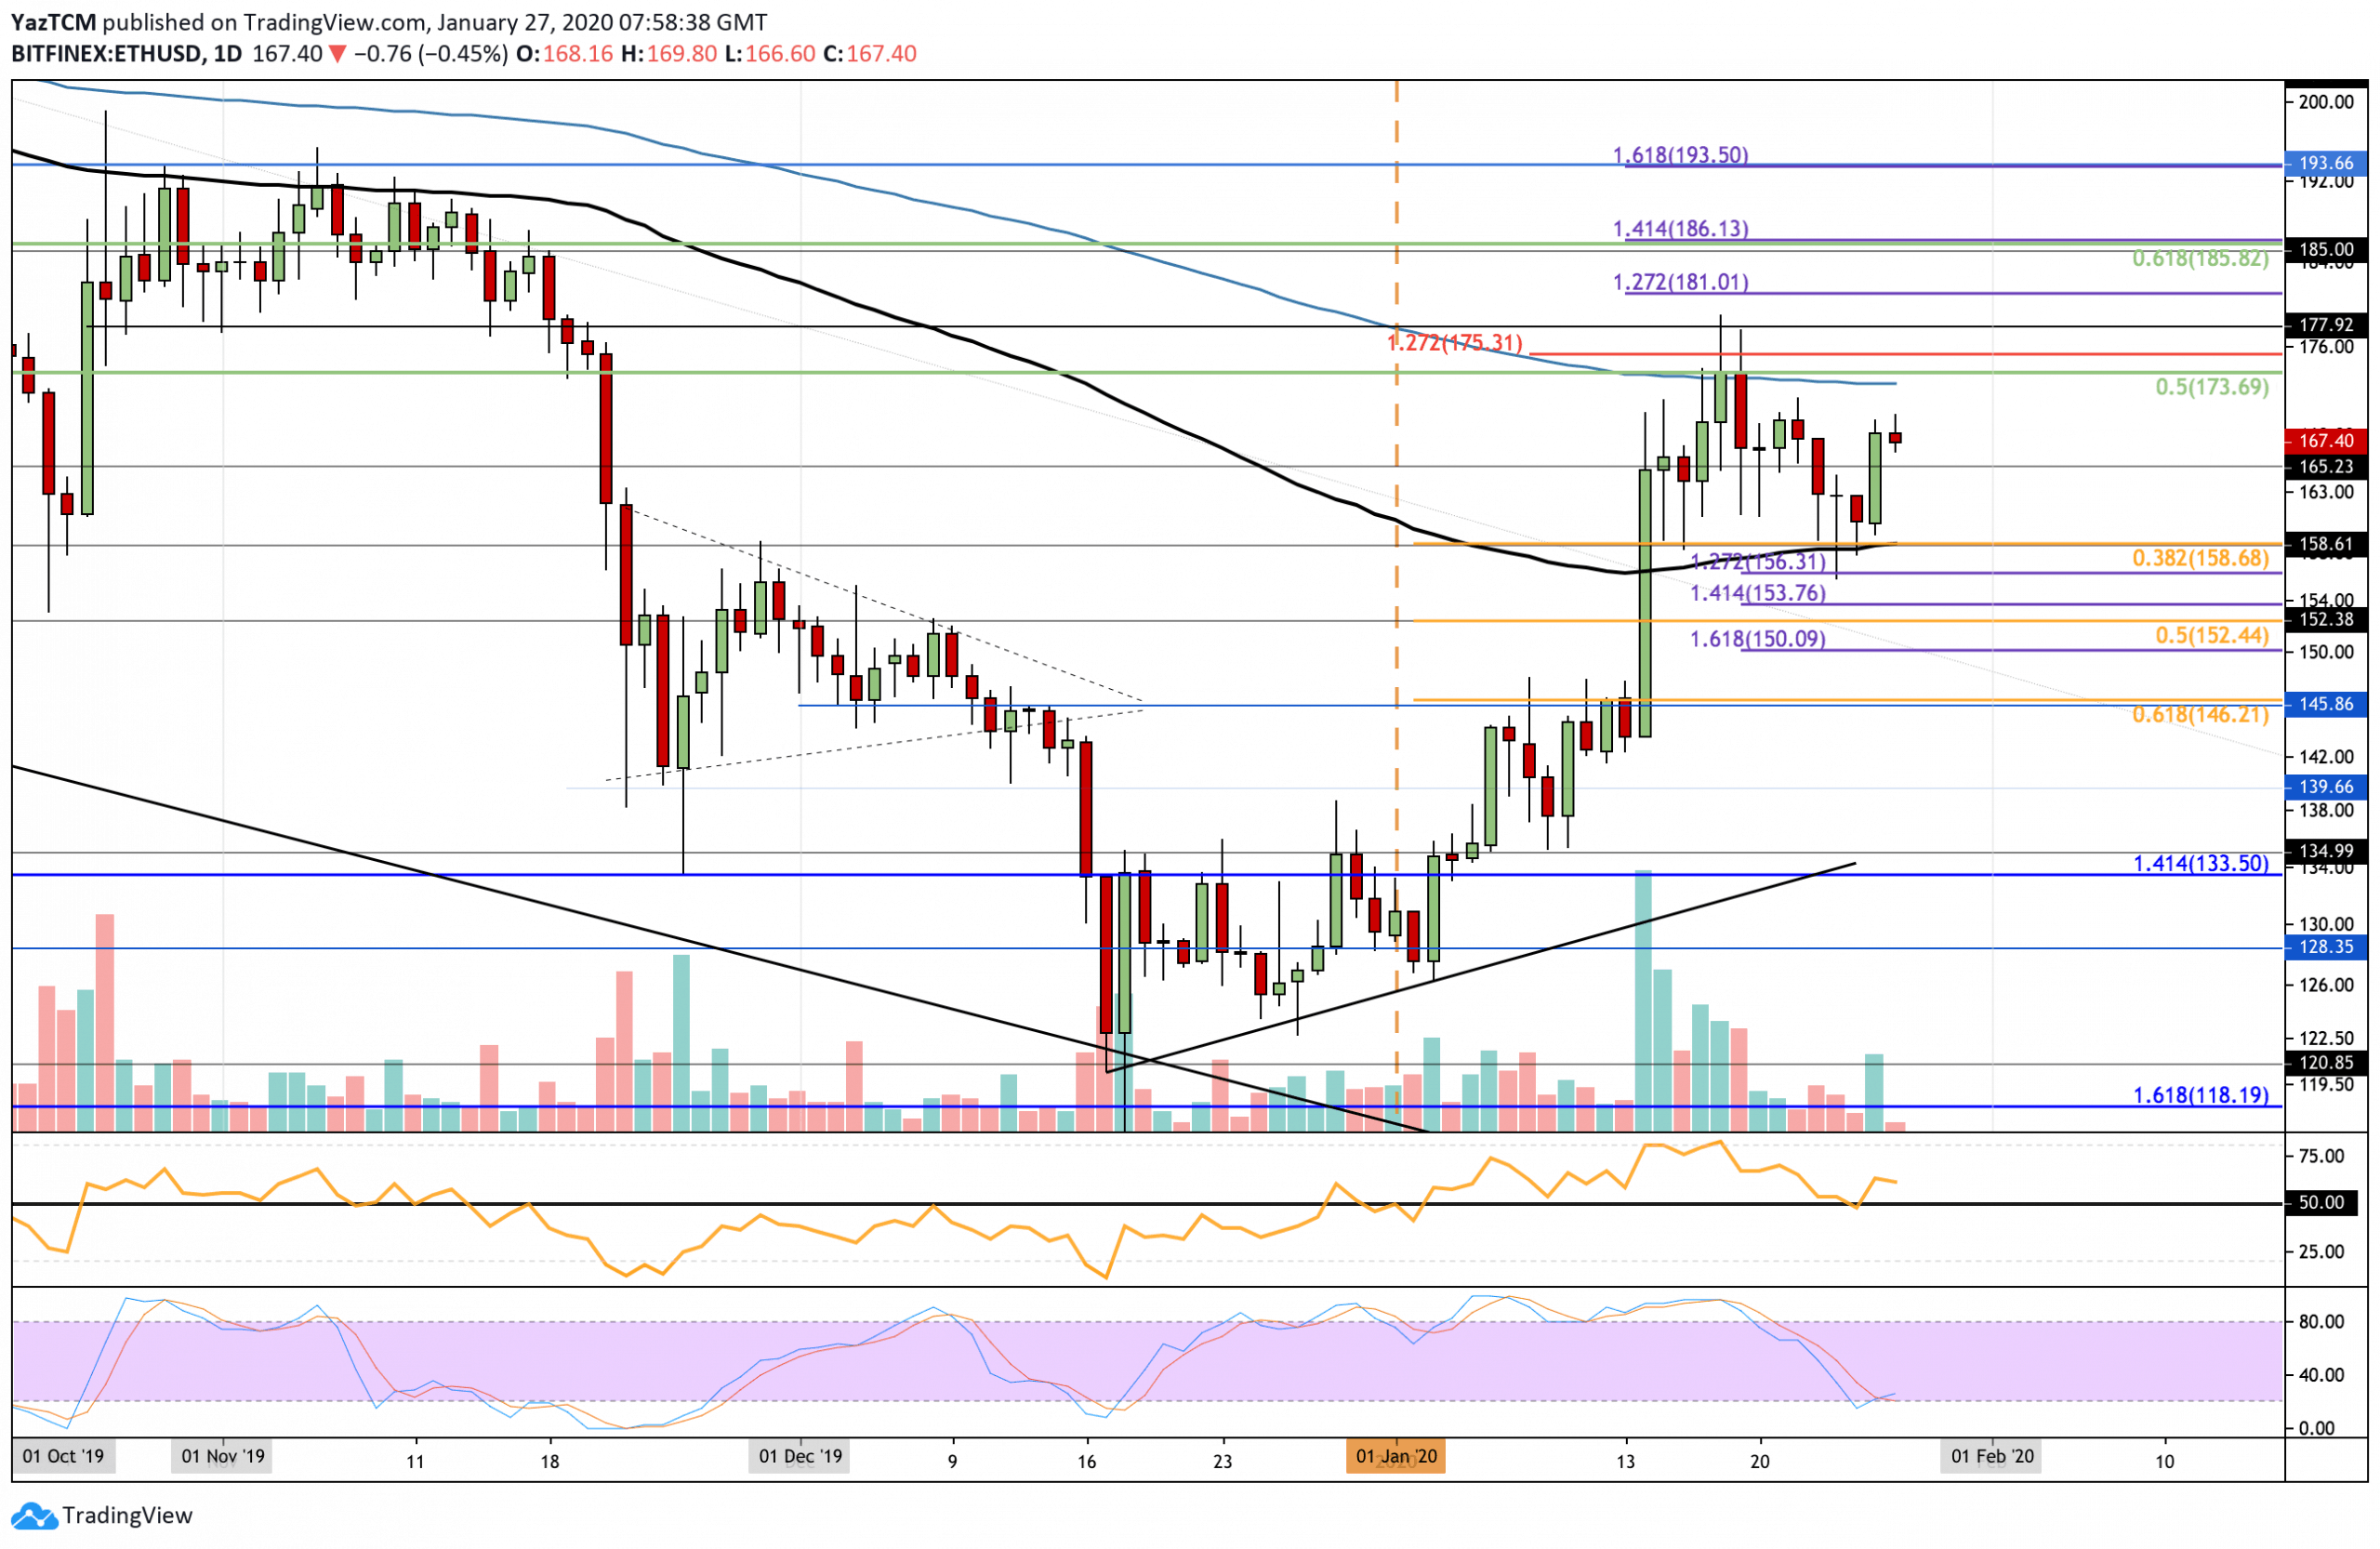 Ethereum Price Analysis: ETH Looks Primed To Test 200EMA Resistance At $173